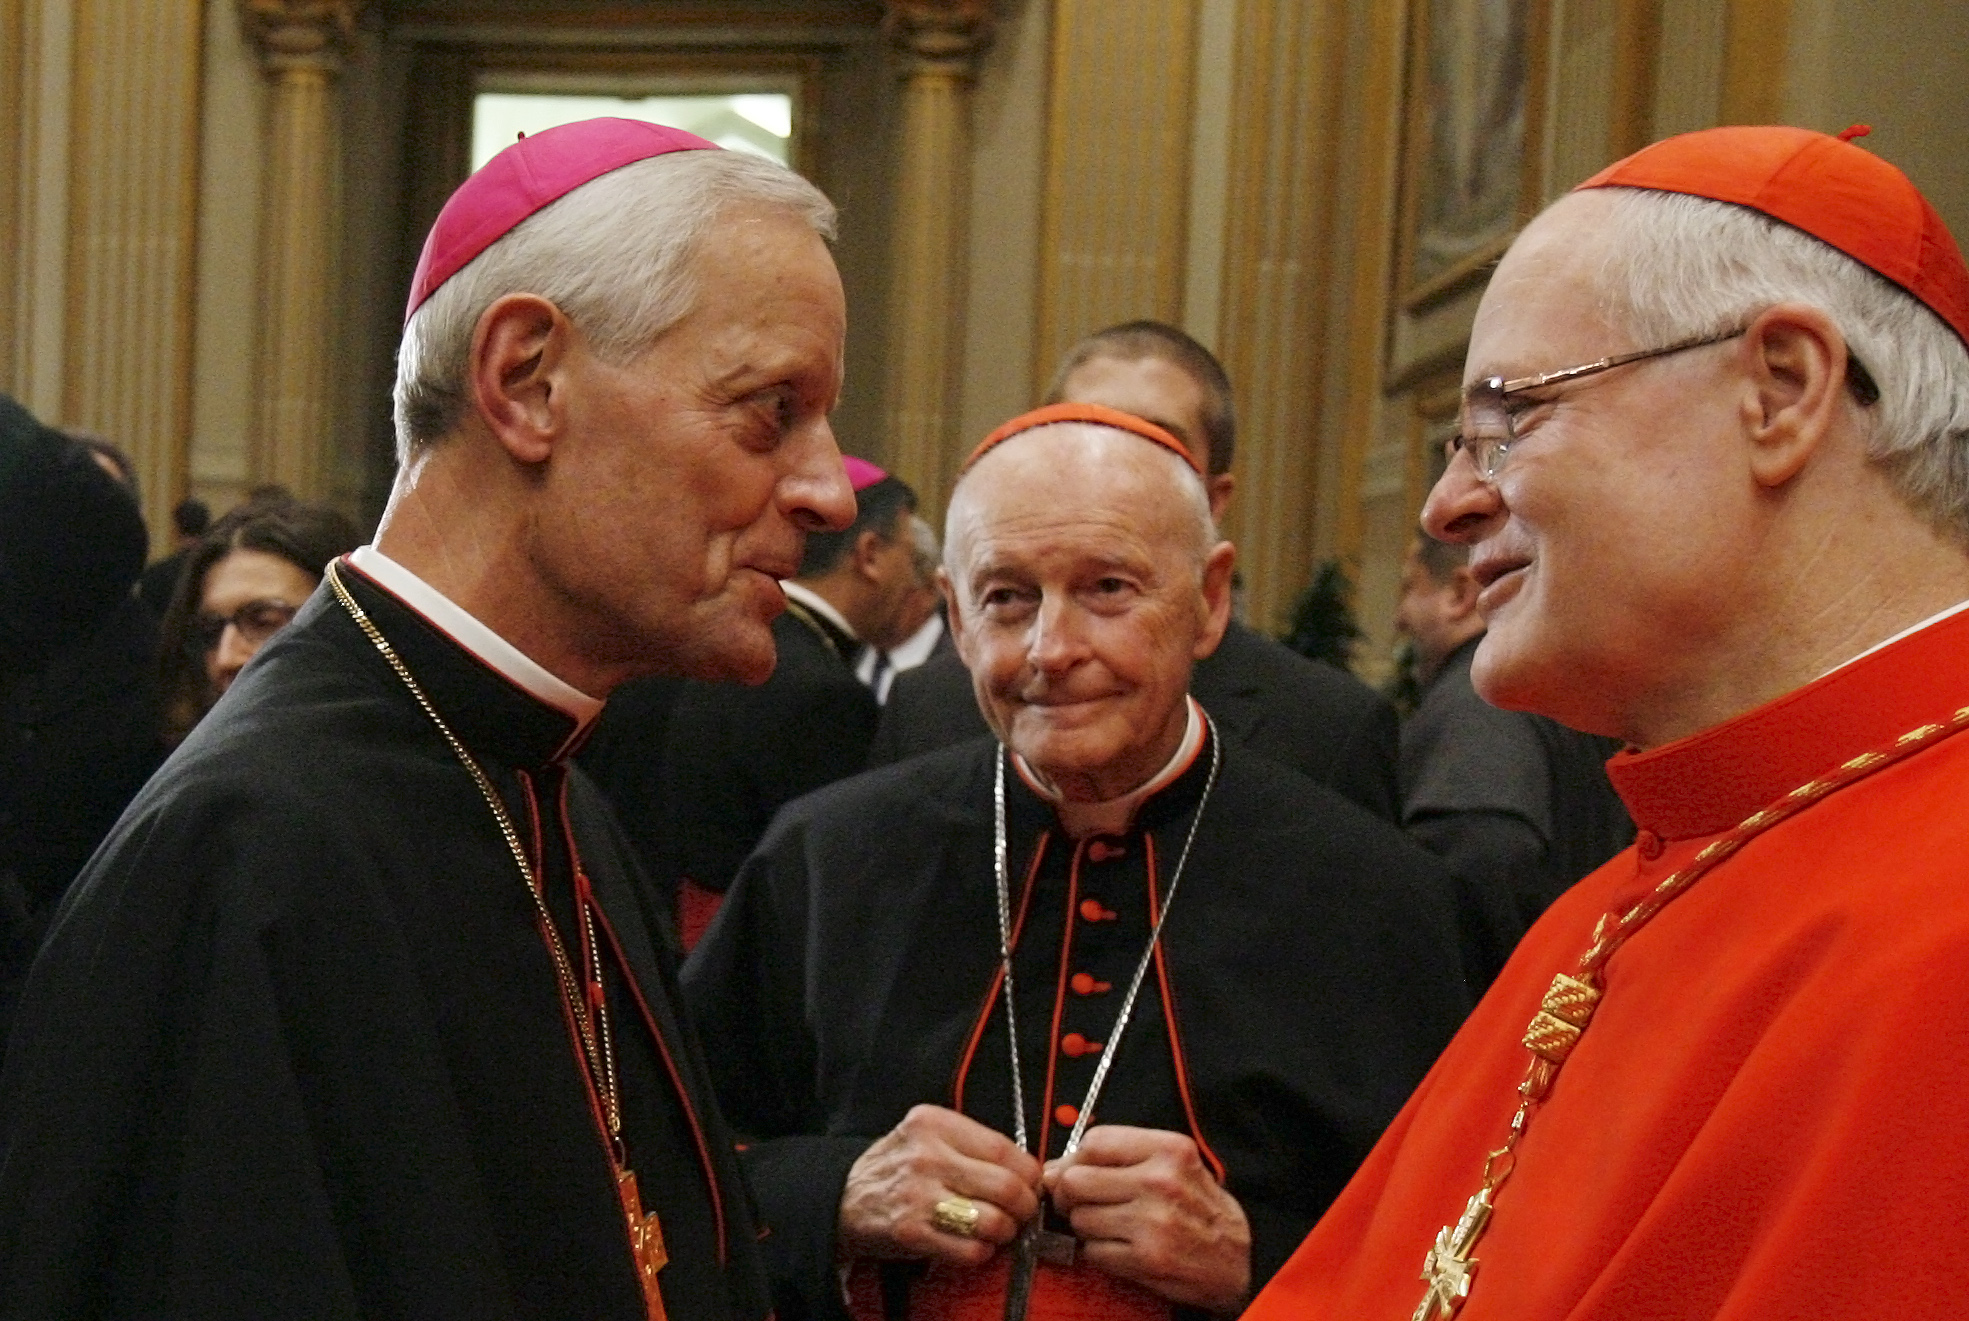 Wuerl apologises for 'lapse of memory' over abuse allegation